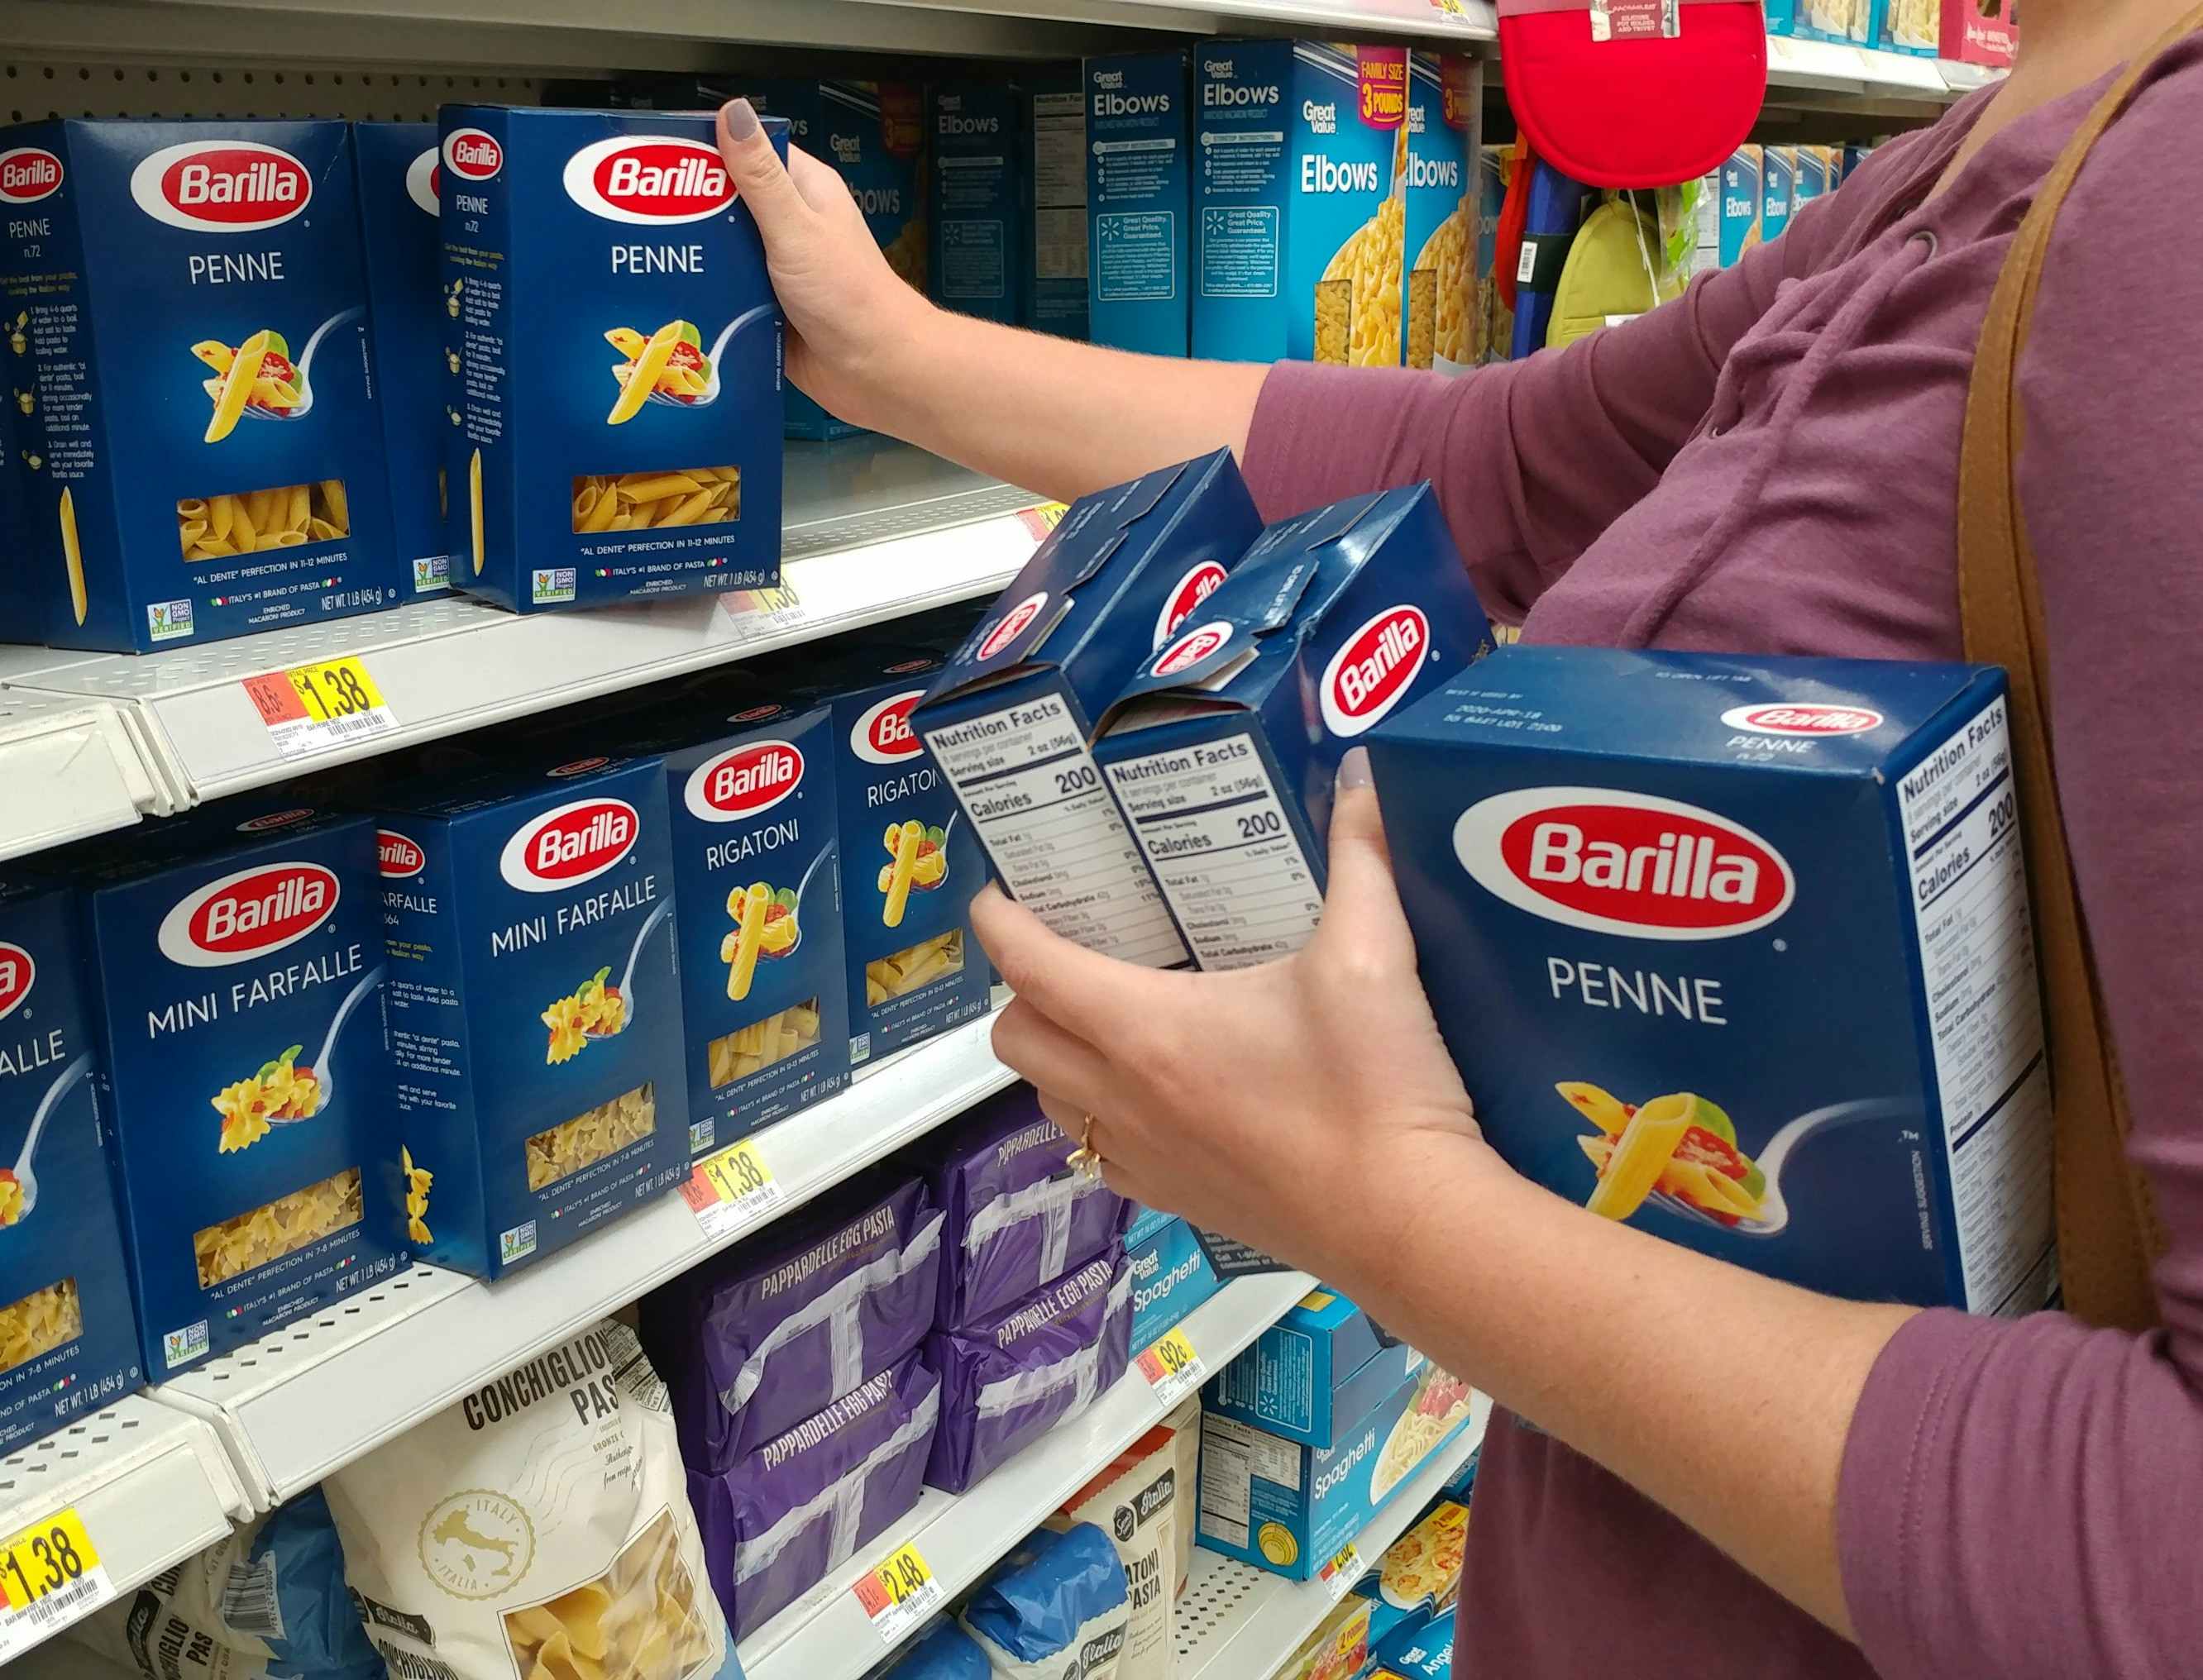 A woman taking Barilla Penne pasta off a walmart grocery store shelf with 3 boxes already in her other arm.